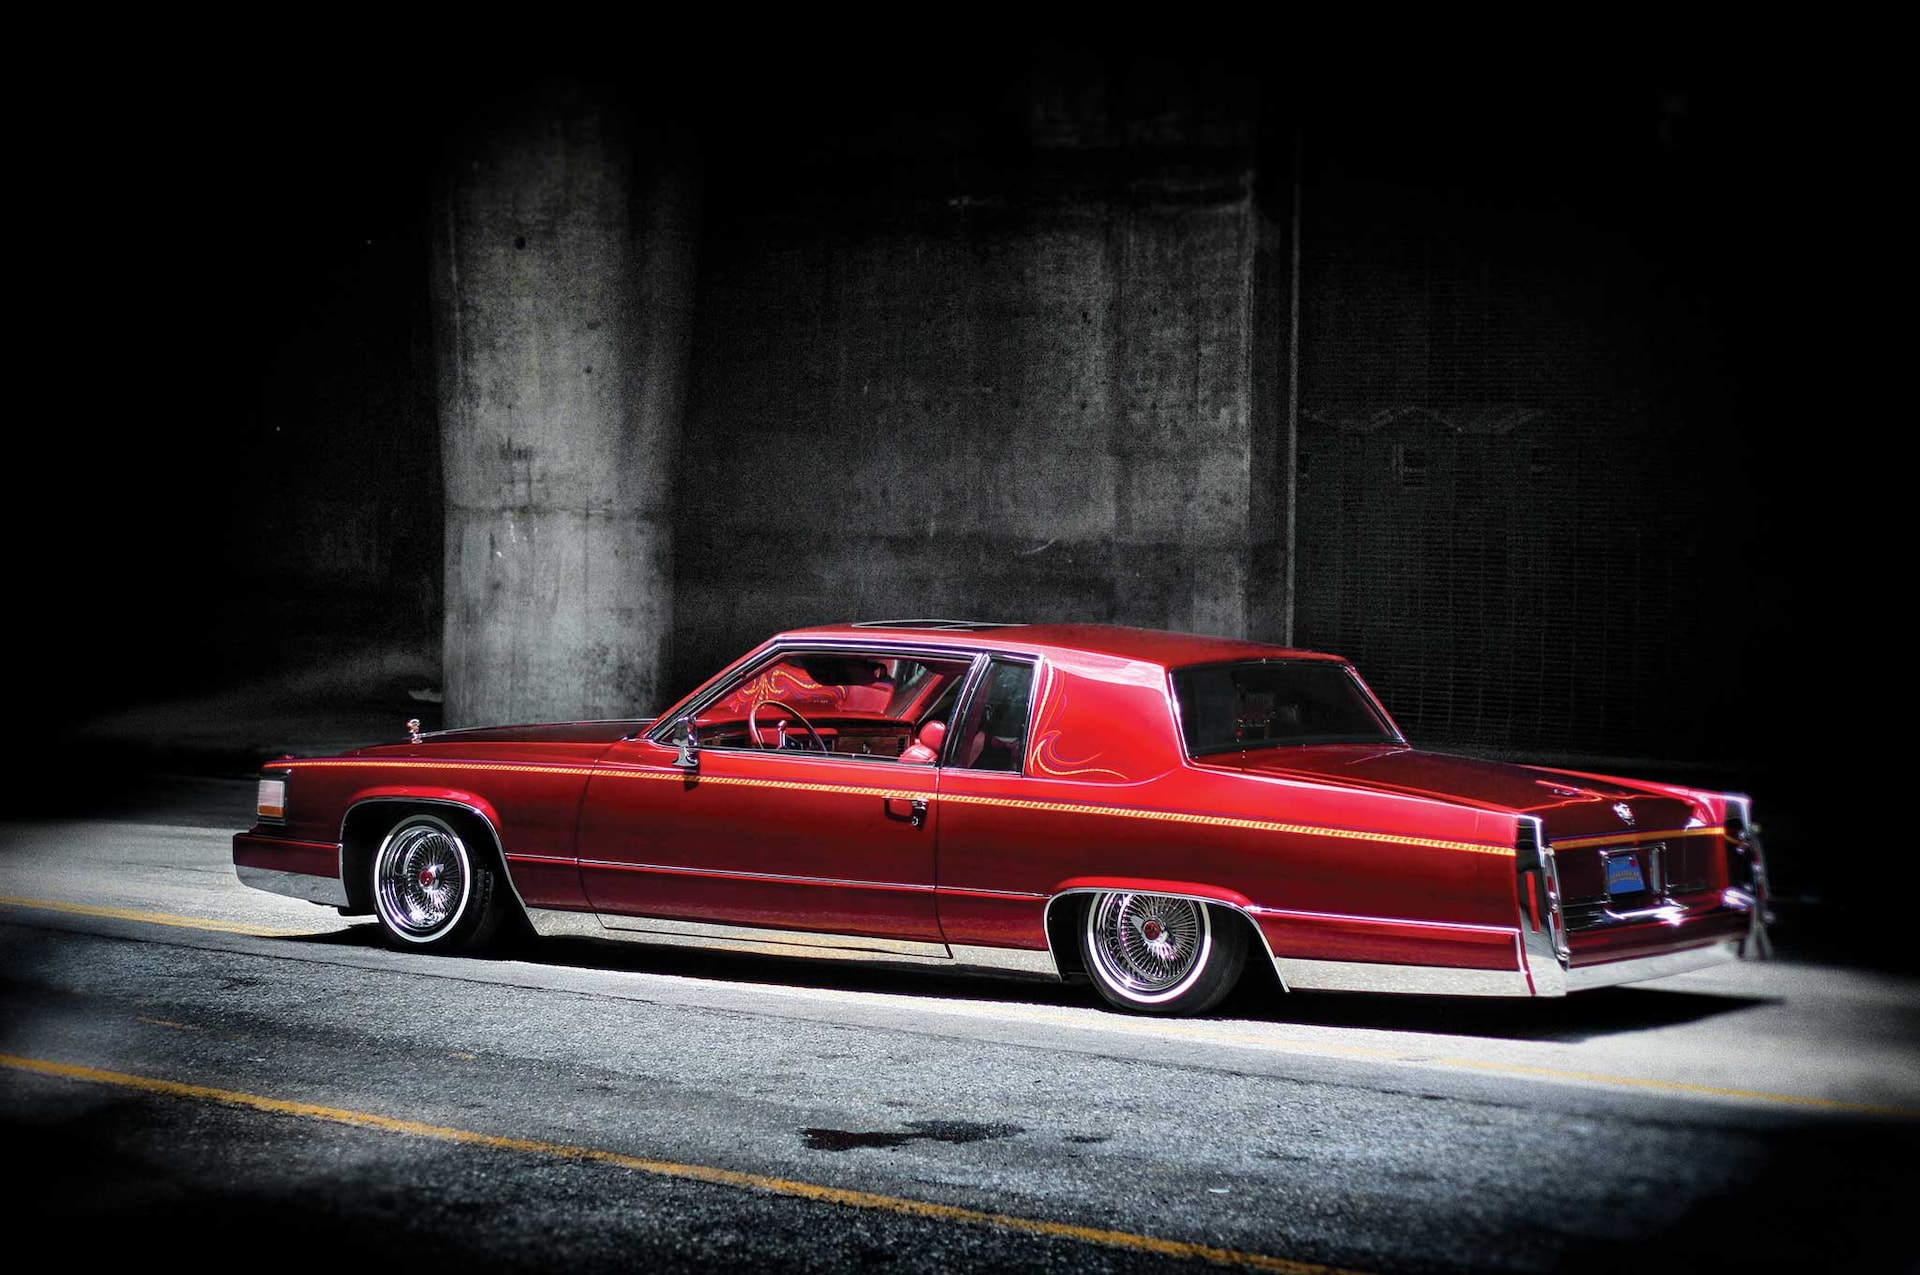 1983 Cadillac Coupe DeVille - Love Her Madly